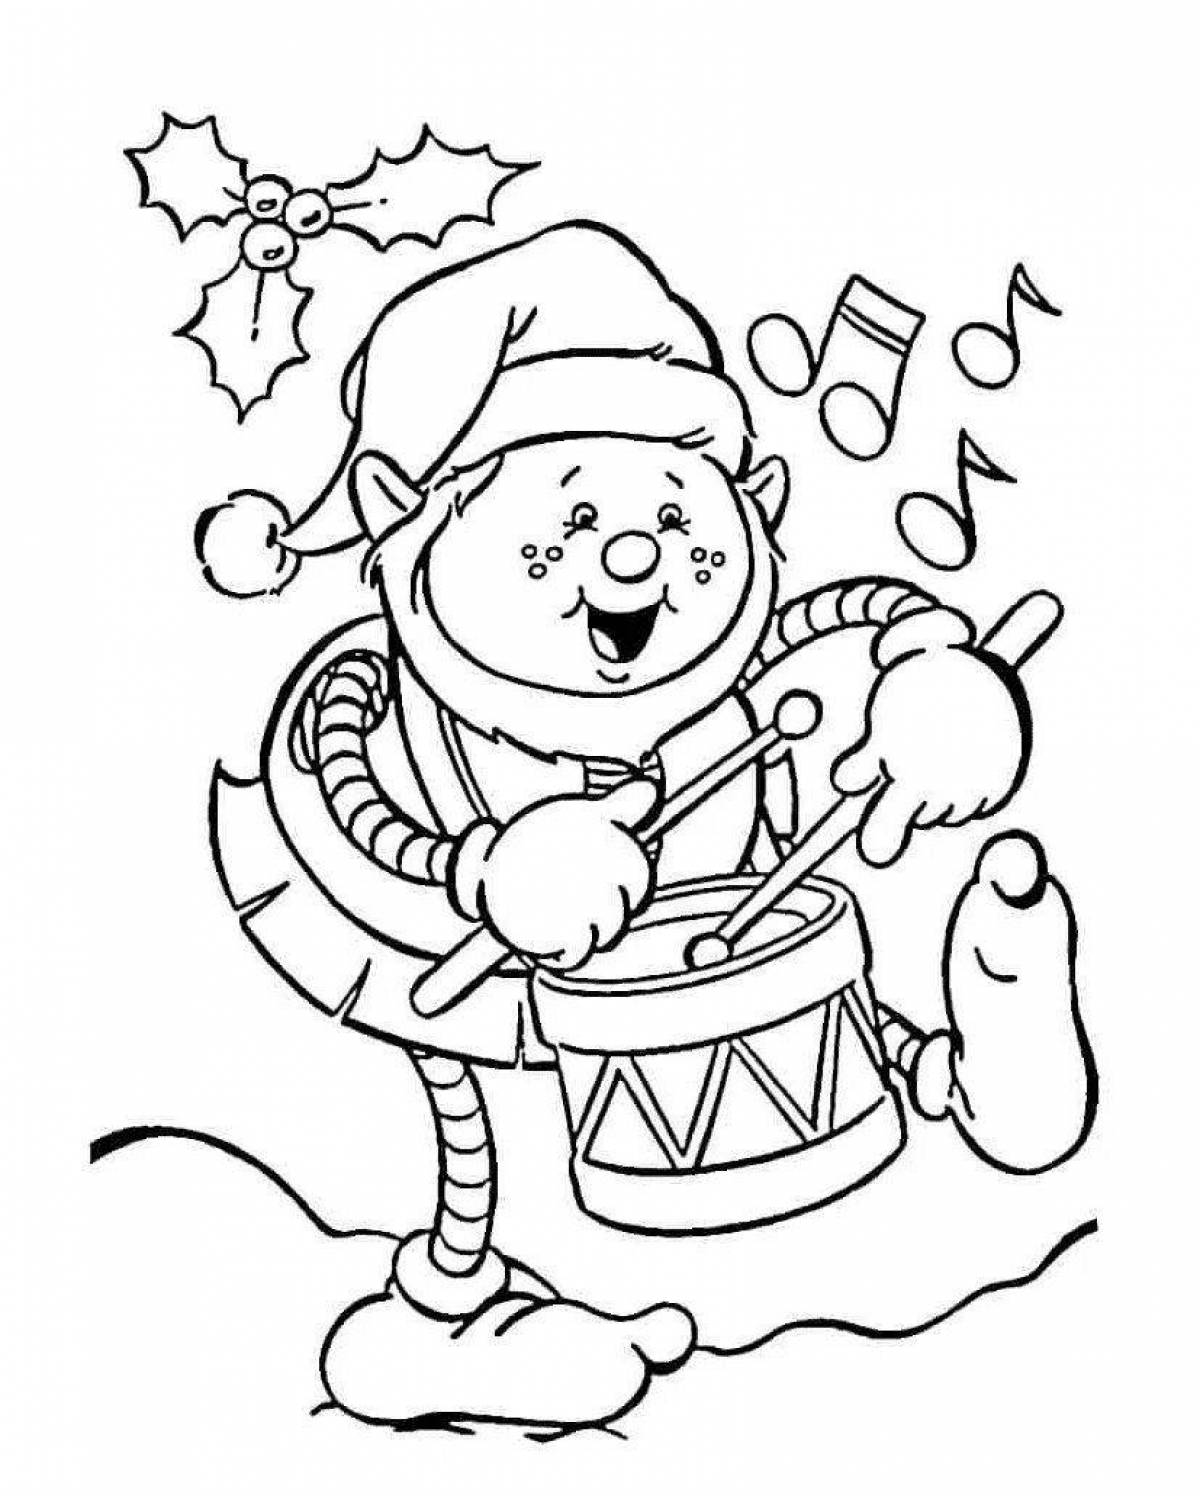 Friendly christmas elf coloring book